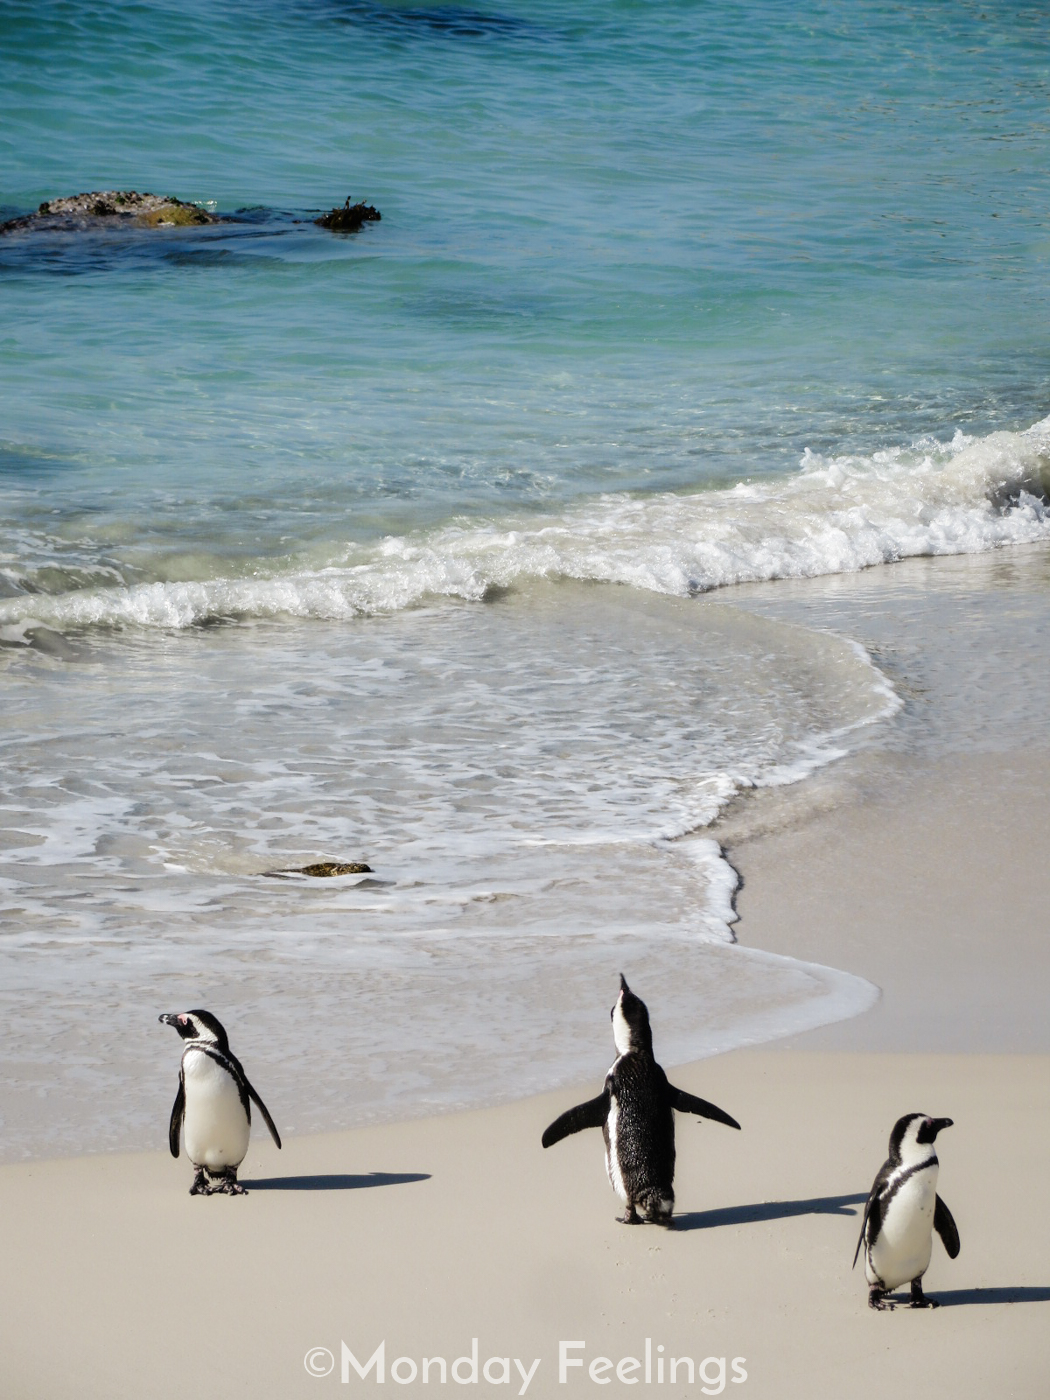 Visiting Boulders Beach, one of the unmissable things you should do in South Africa